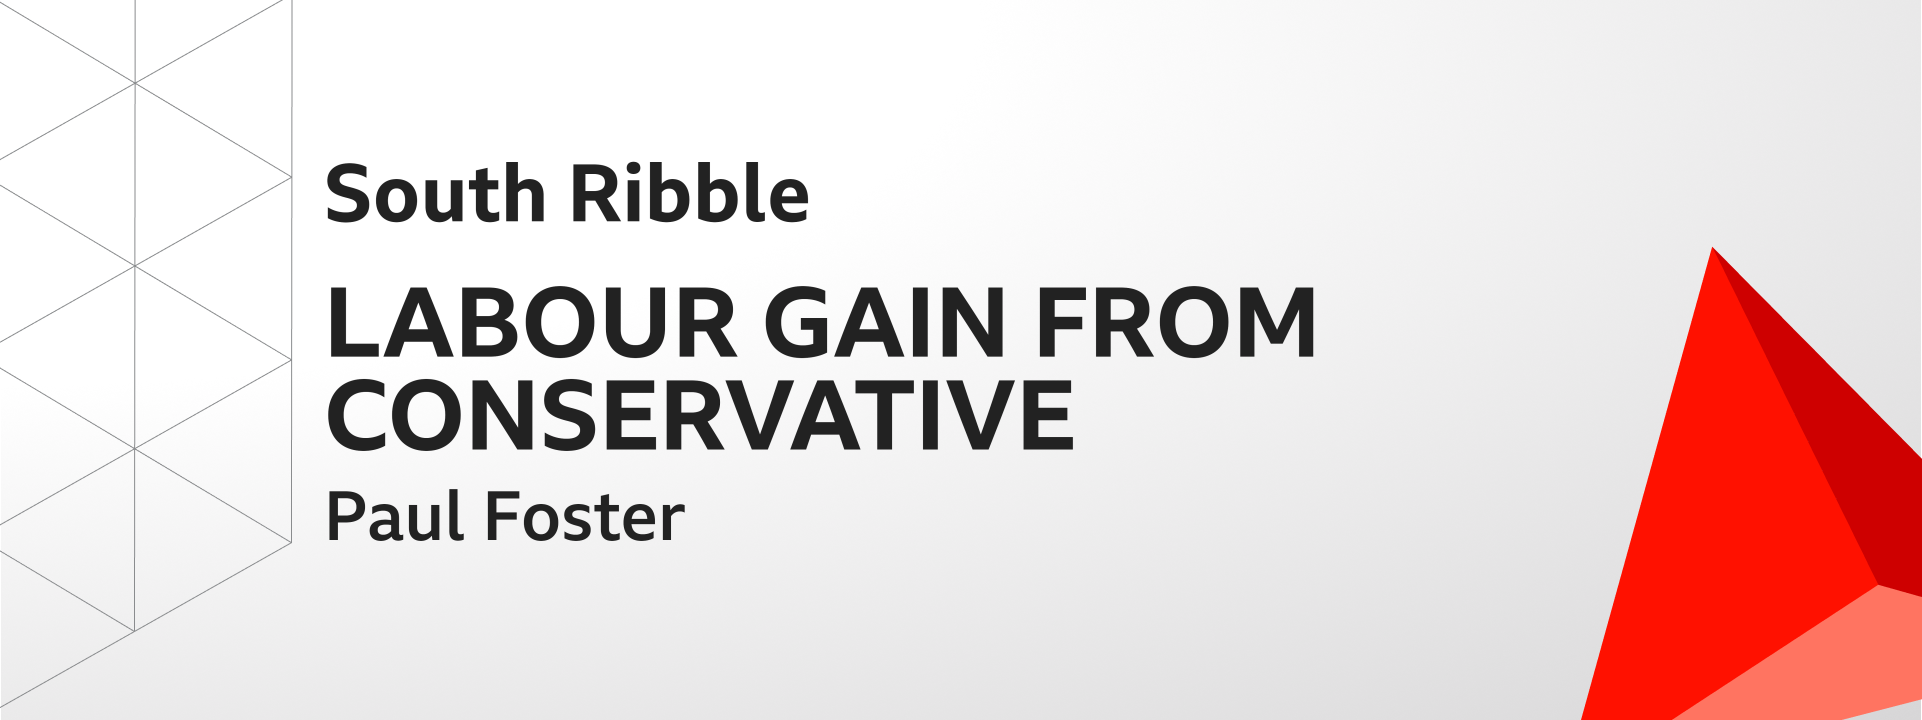 Graphic showing Labour gains South Ribble from the Conservatives. The winning candidate was Paul Foster.